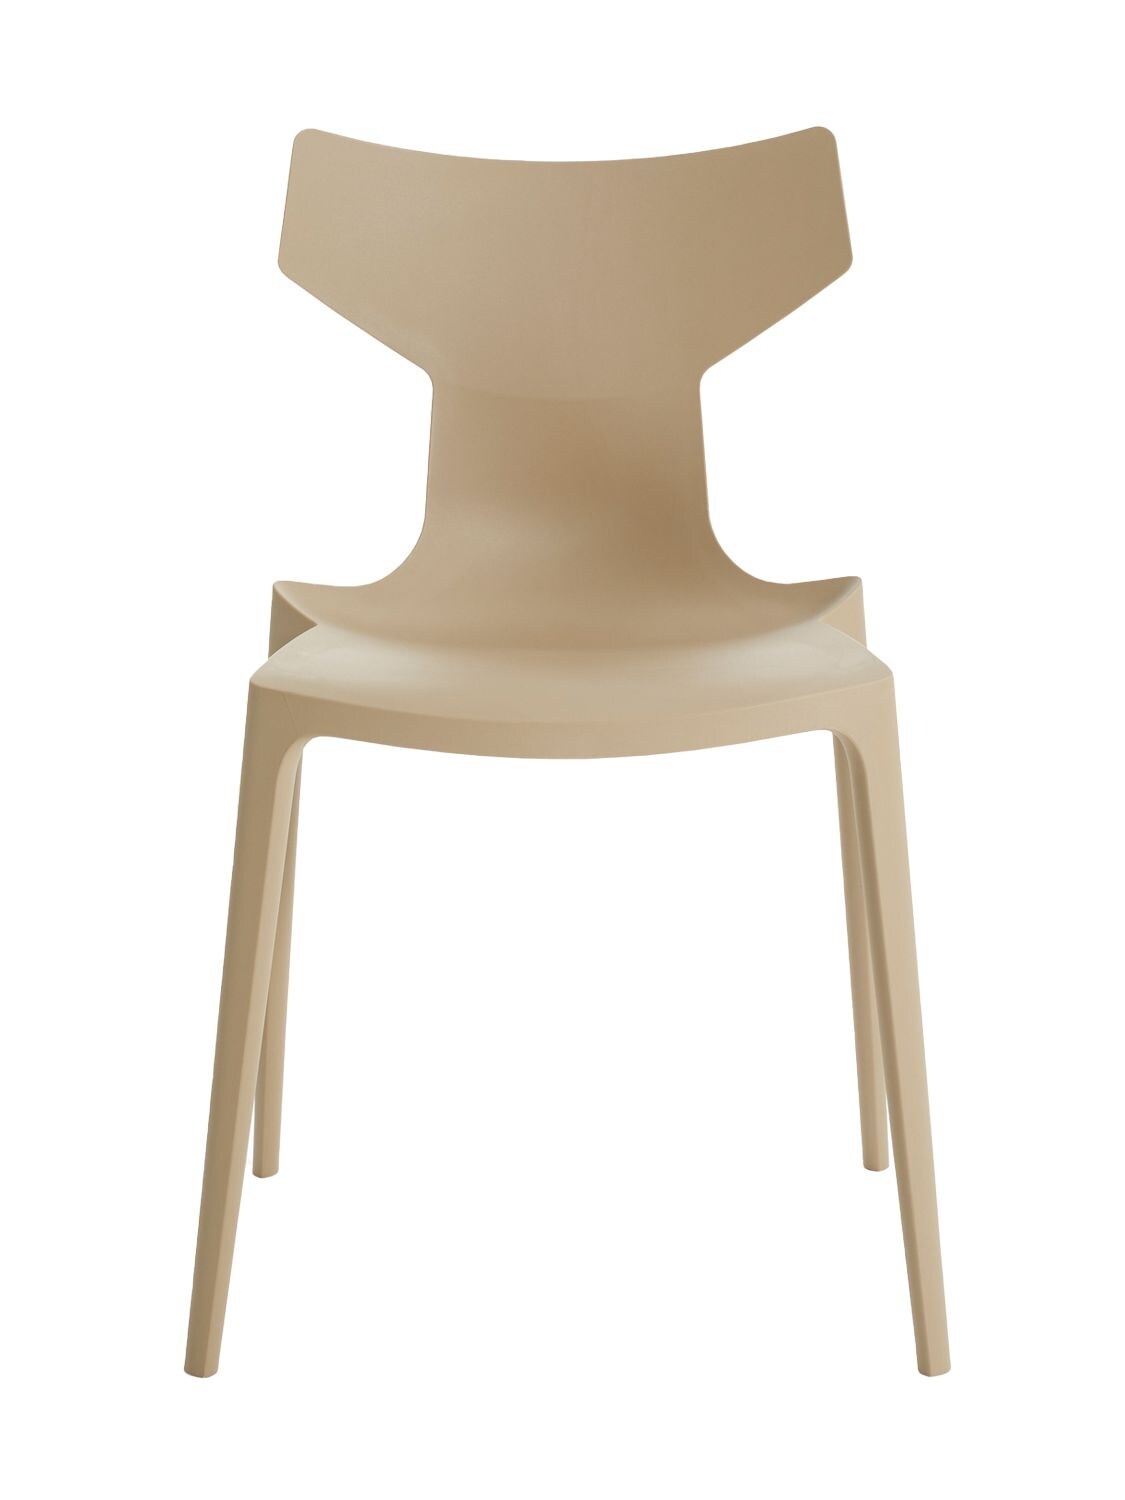 Kartell Set Of 2 Re-chair Chairs In Tortora